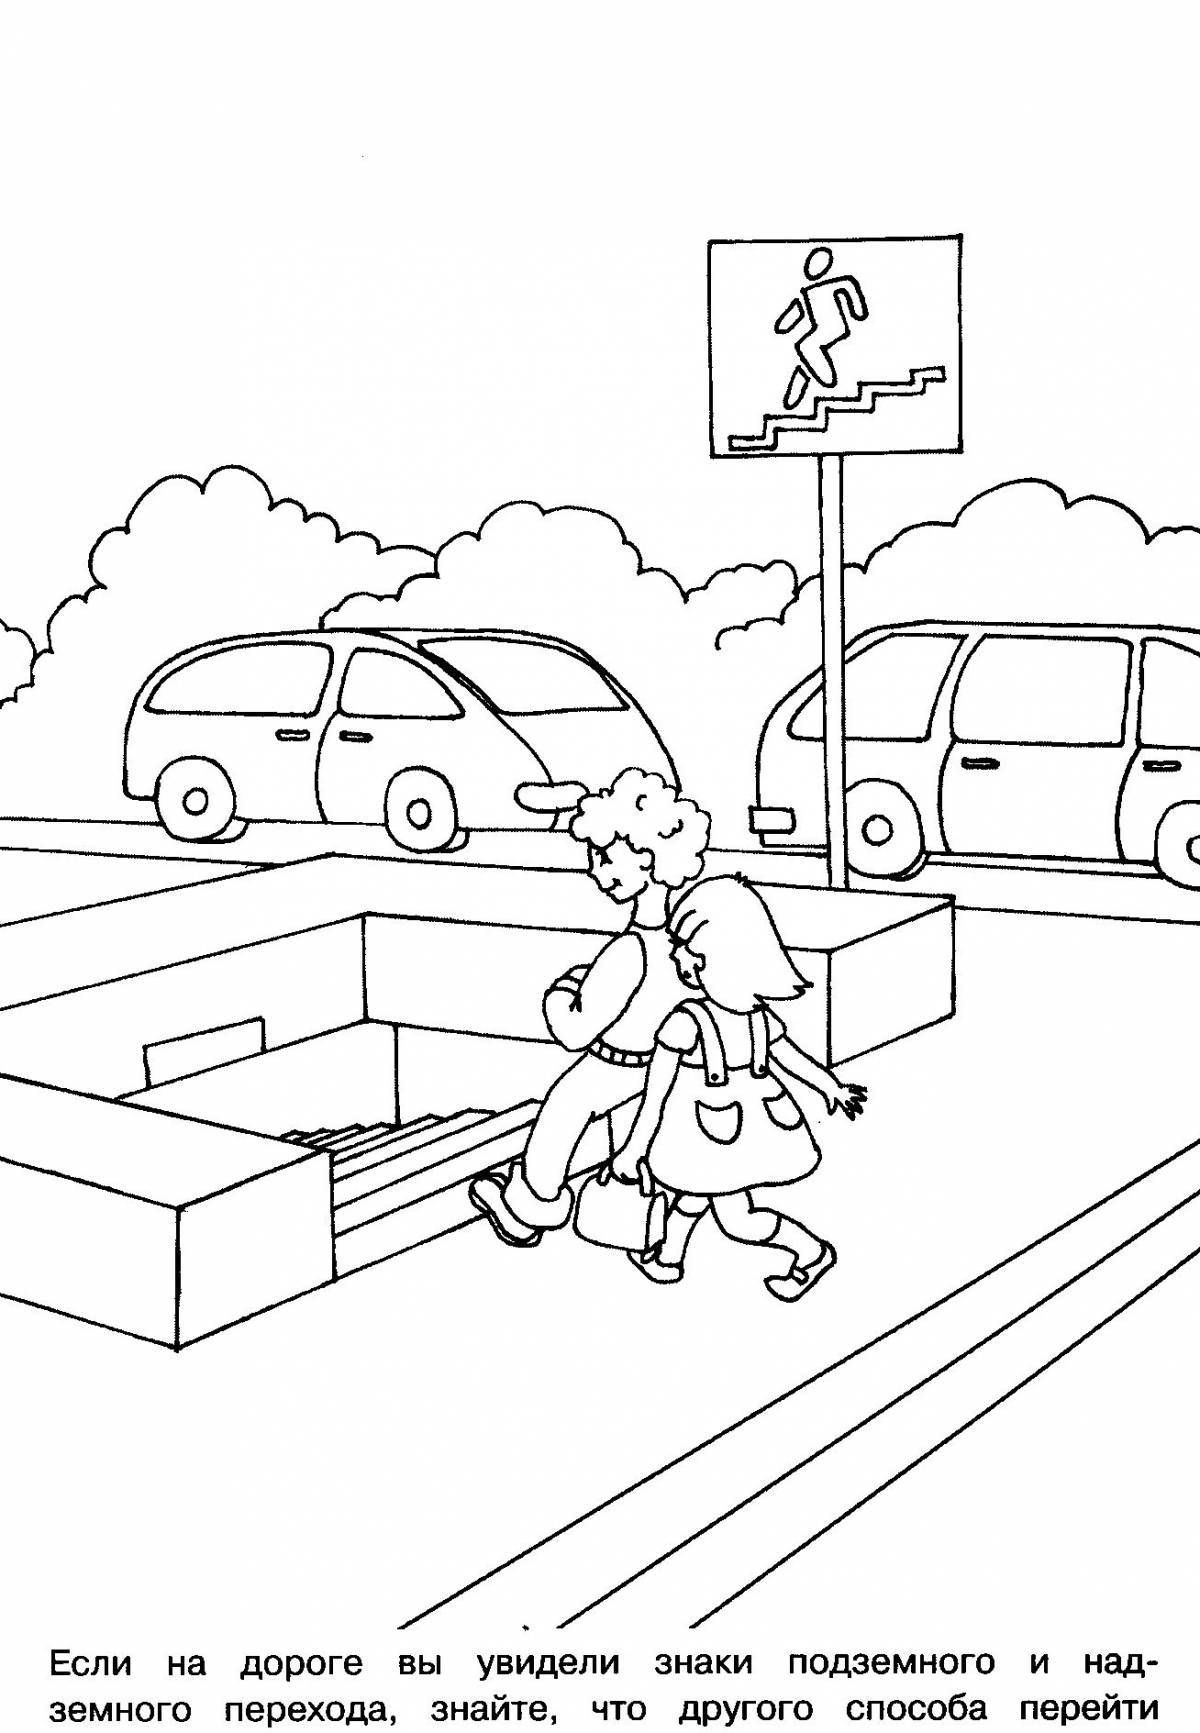 Attractive traffic rules coloring pages for preschoolers